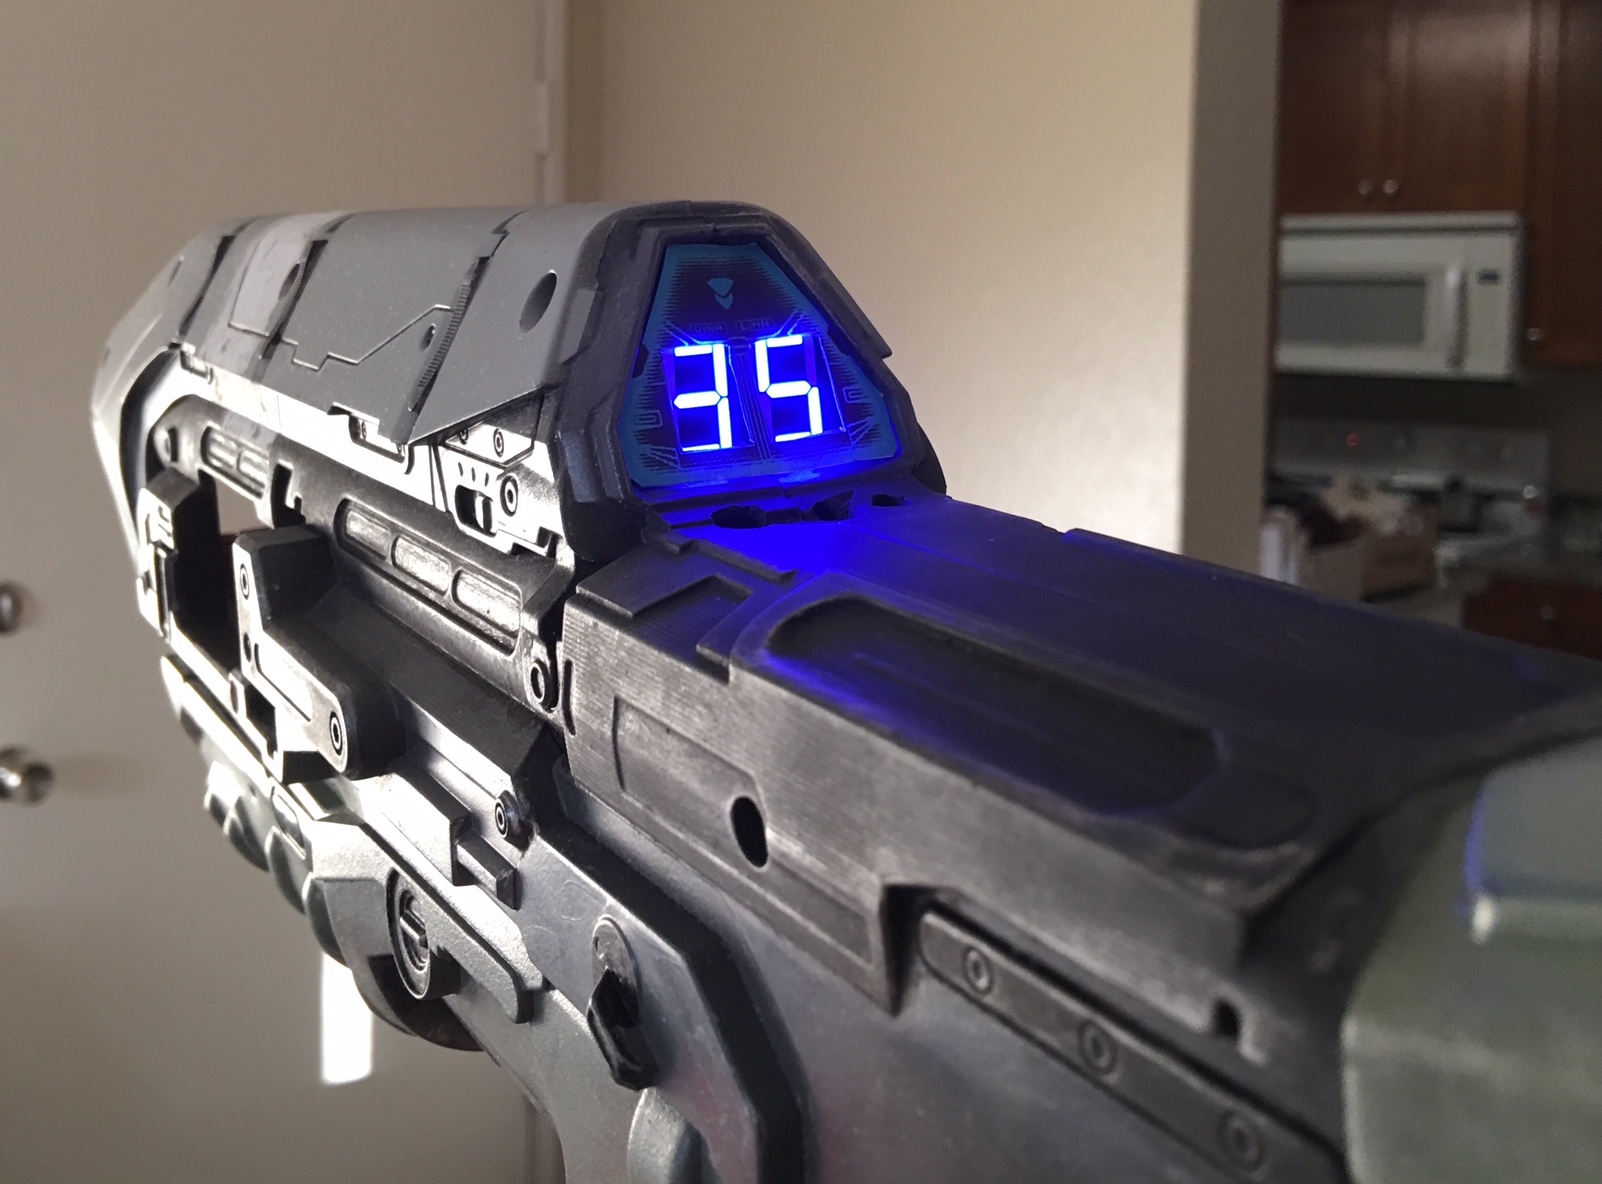 Halo Gun Counts Your Ammo In The Real World